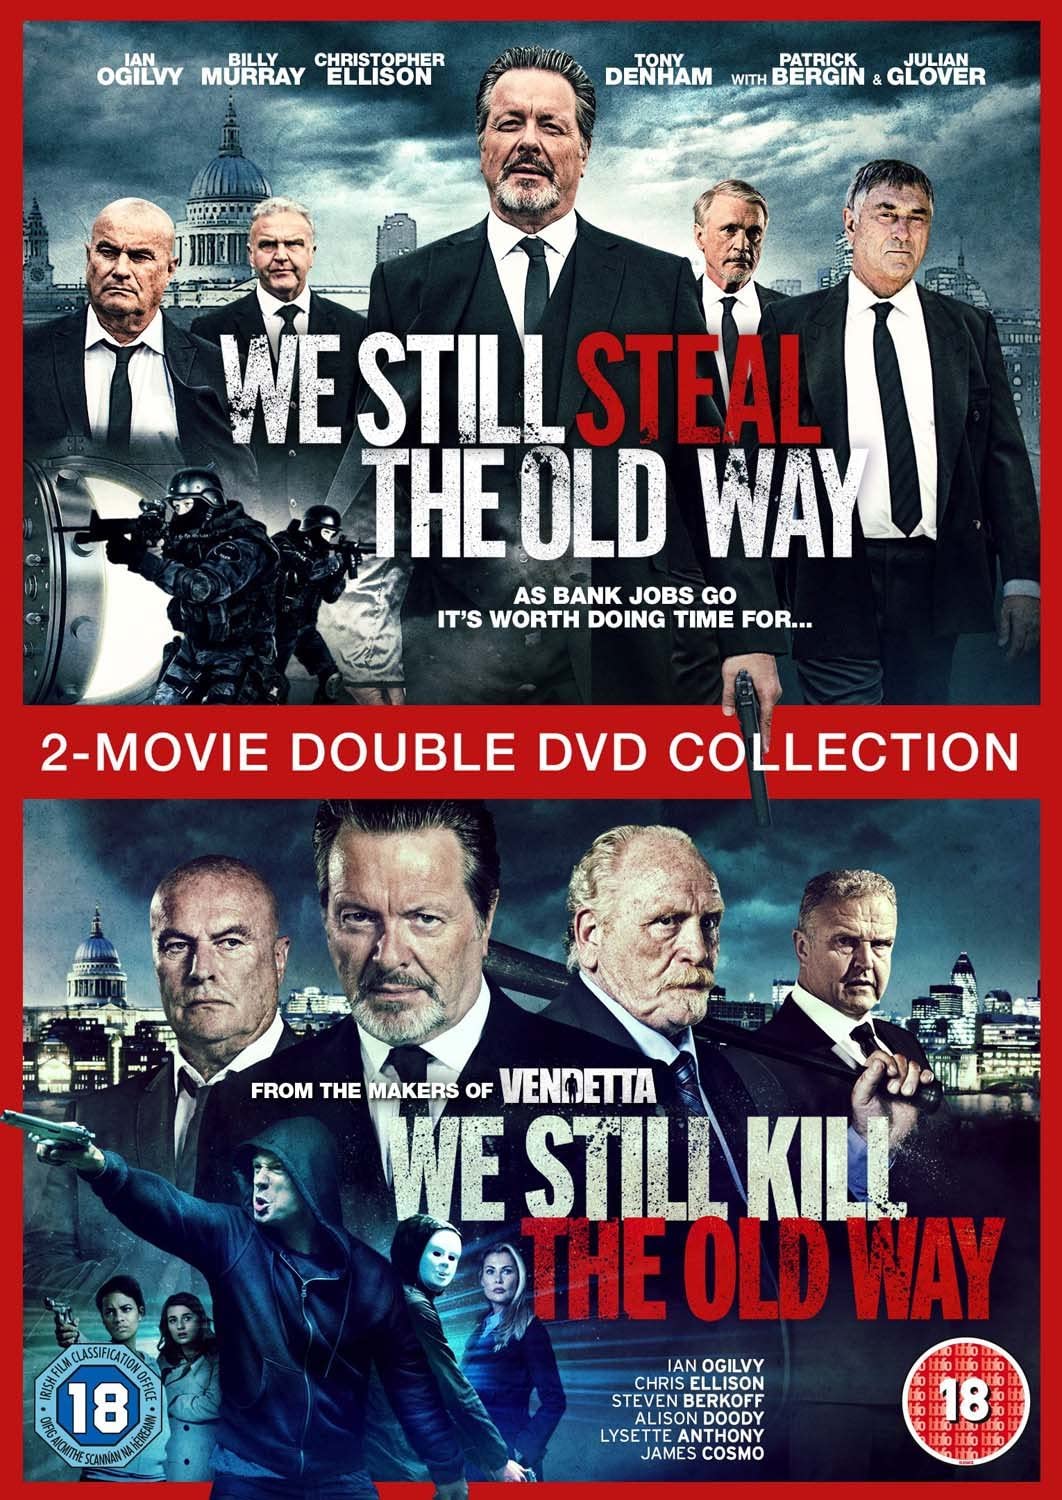 We Still Kill The Old Way/We Still Steal The Old Way - Drama/Crime [DVD]